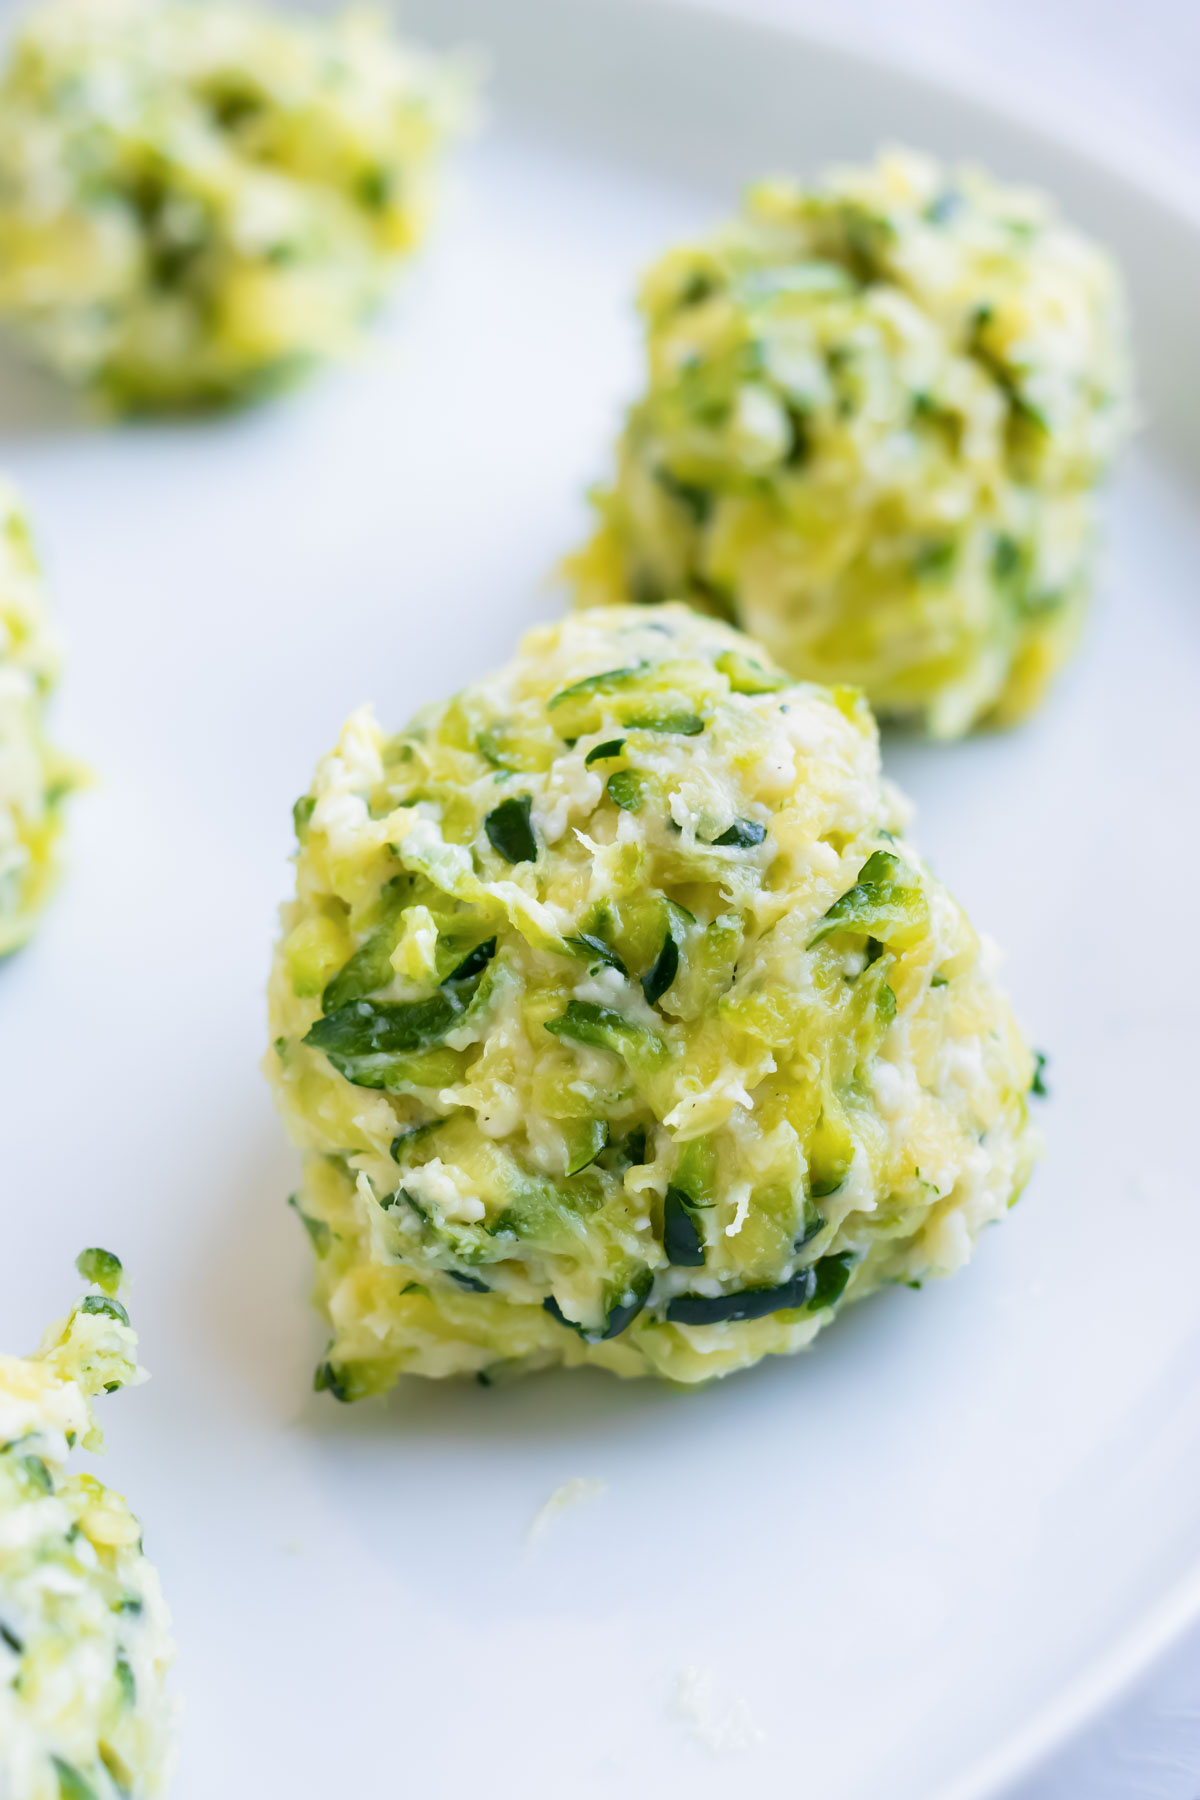 A ball of zucchini and Parmesan cheese for a zucchini fritters recipe.